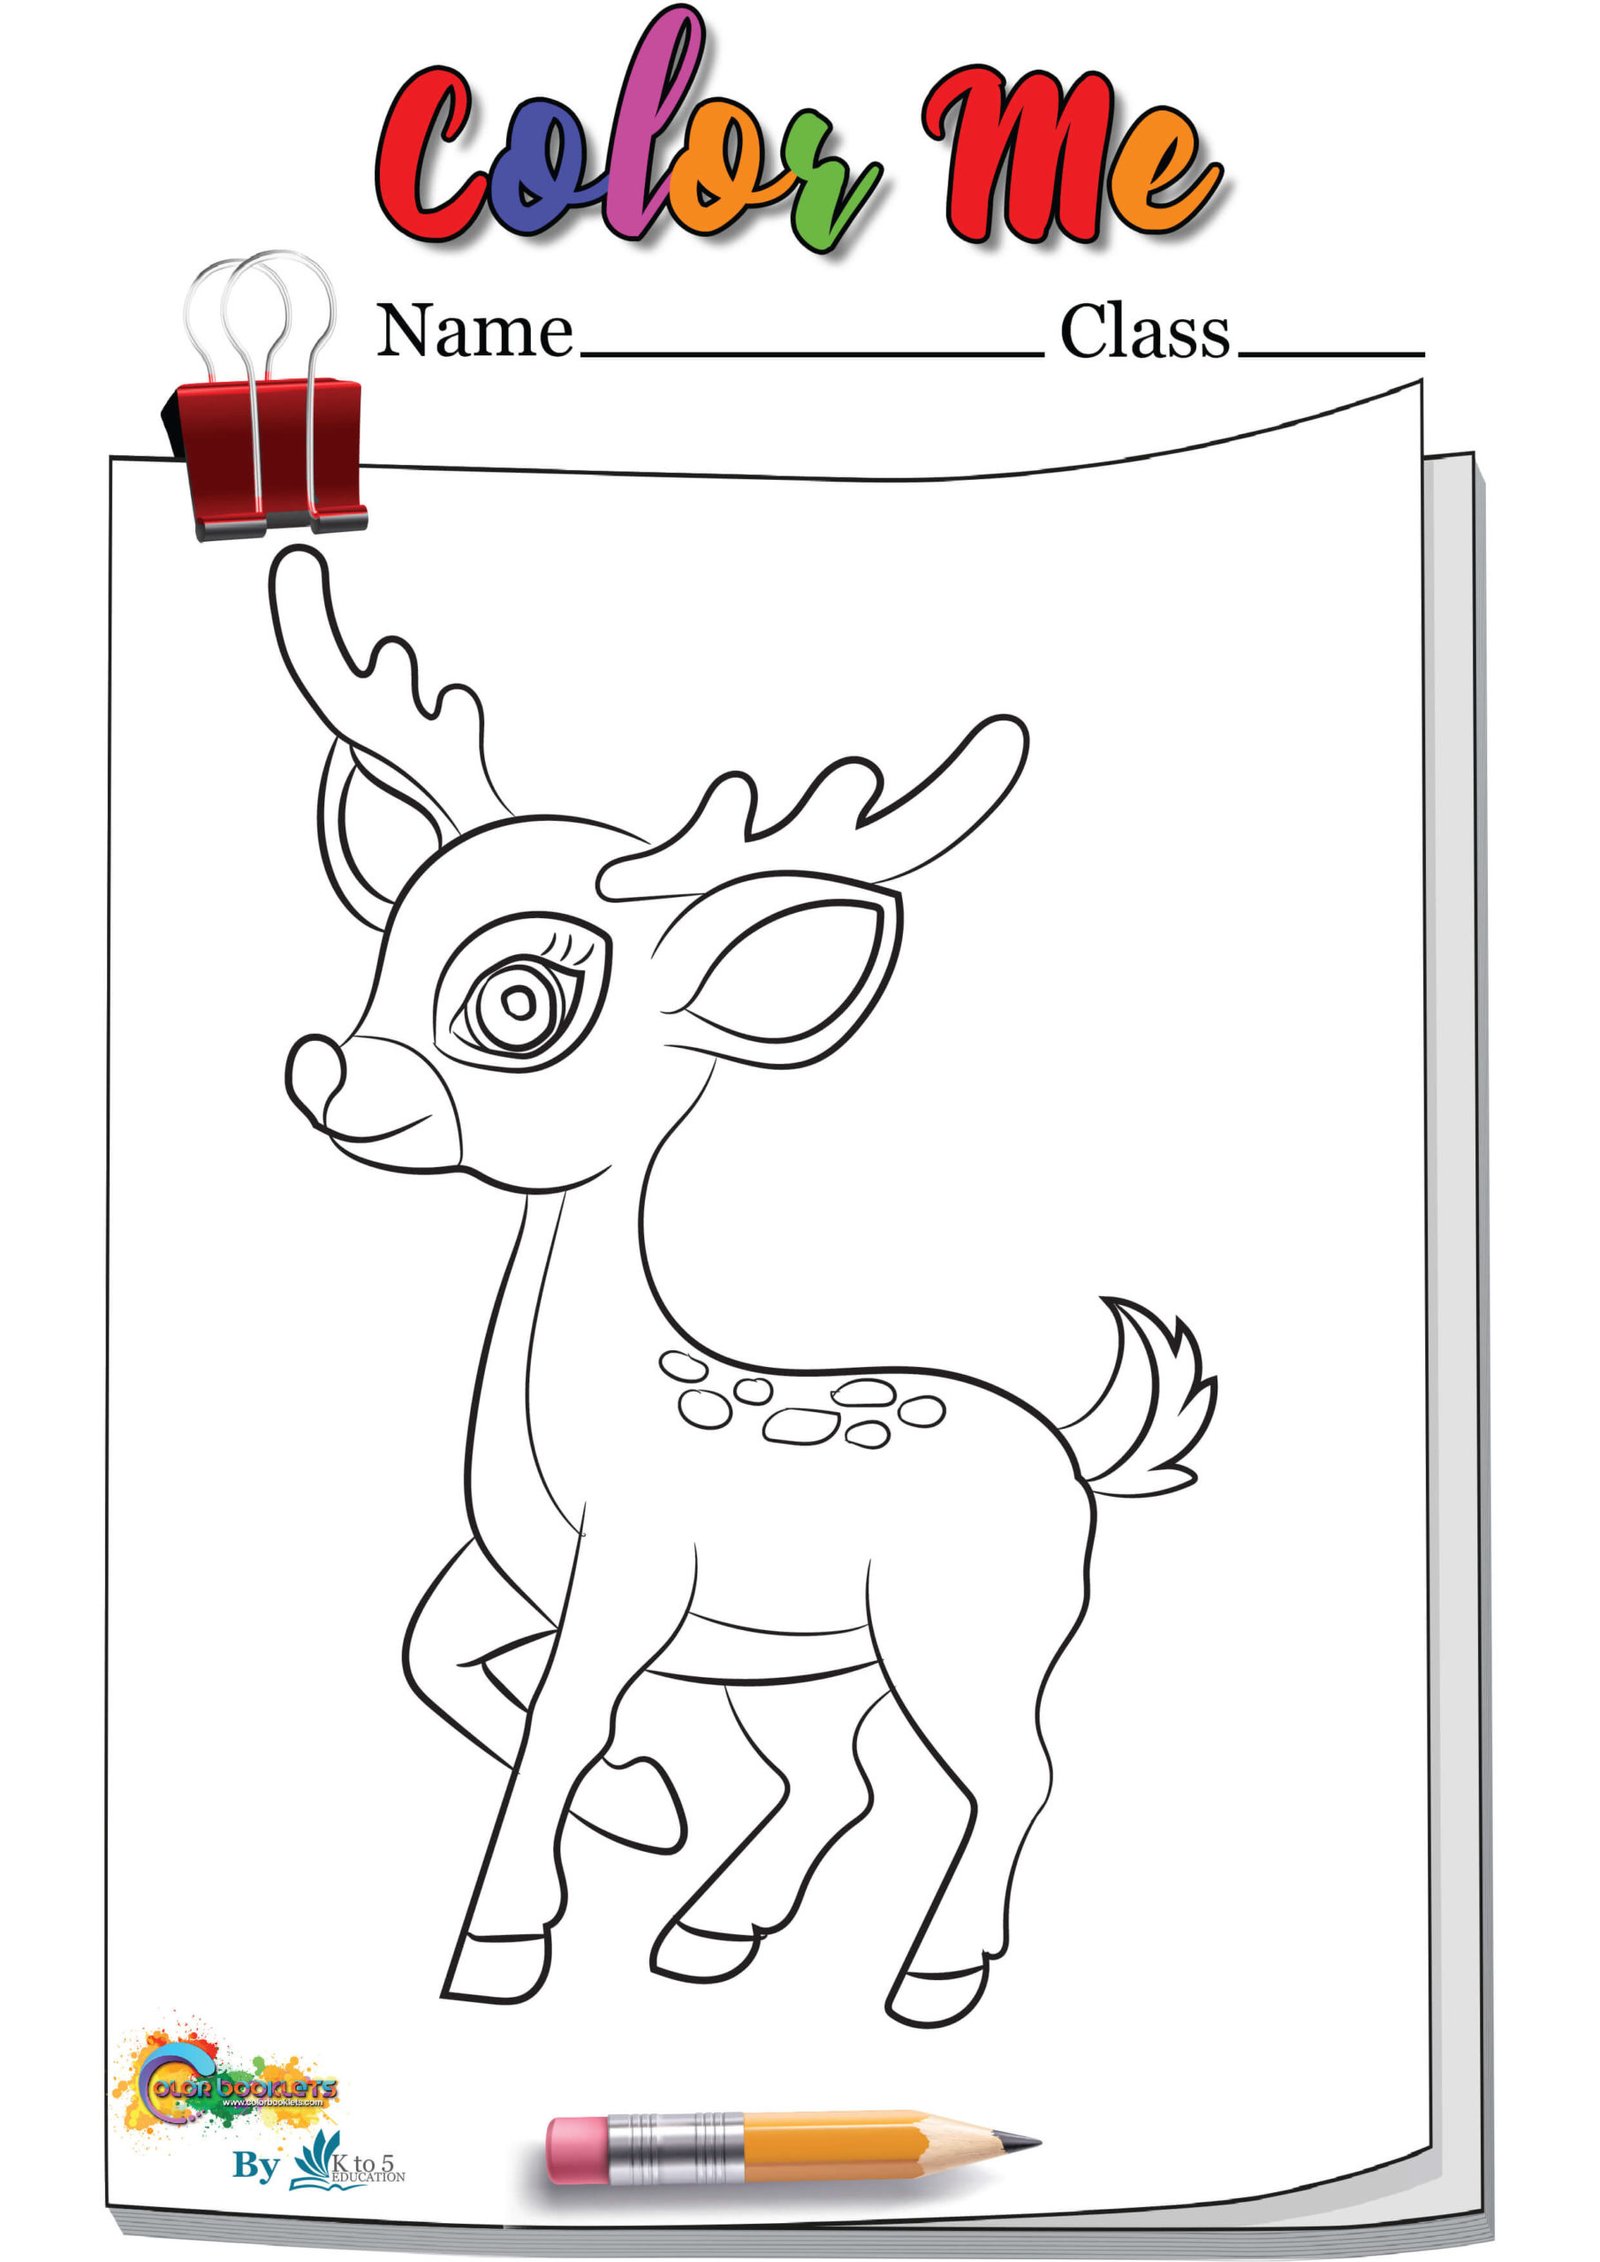 Thinking Deer coloring page